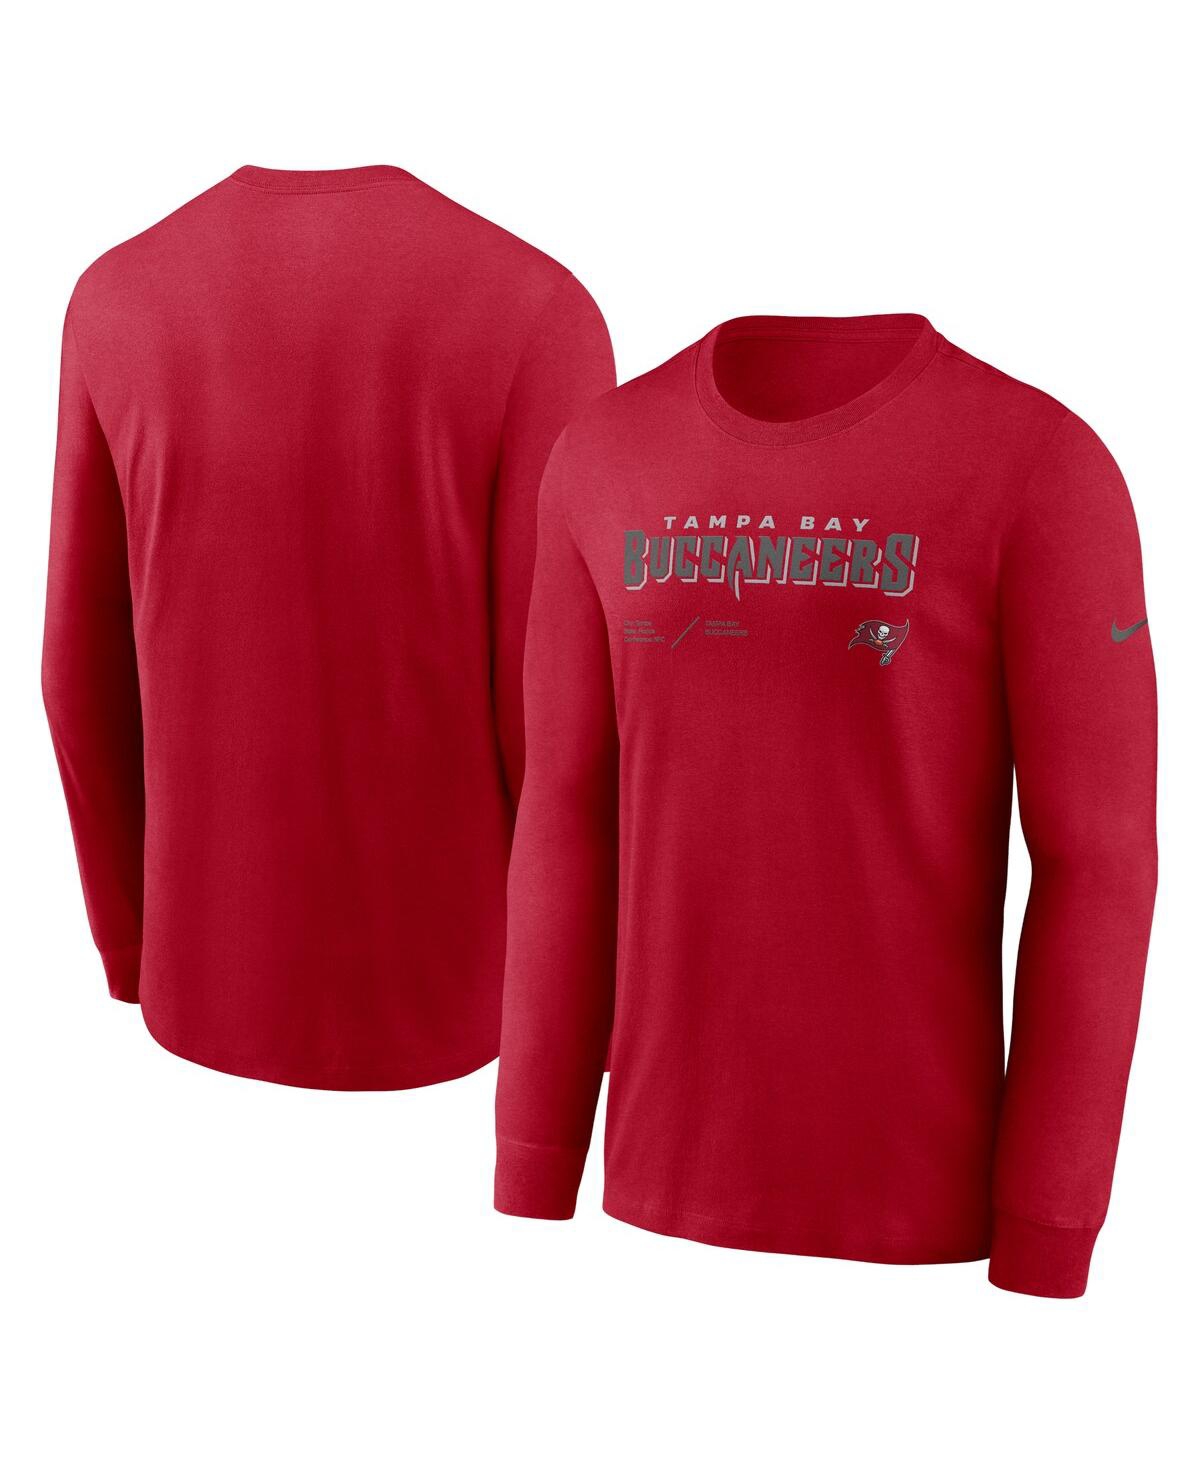 Shop Nike Men's  Red Tampa Bay Buccaneers Infograph Lock Up Performance Long Sleeve T-shirt